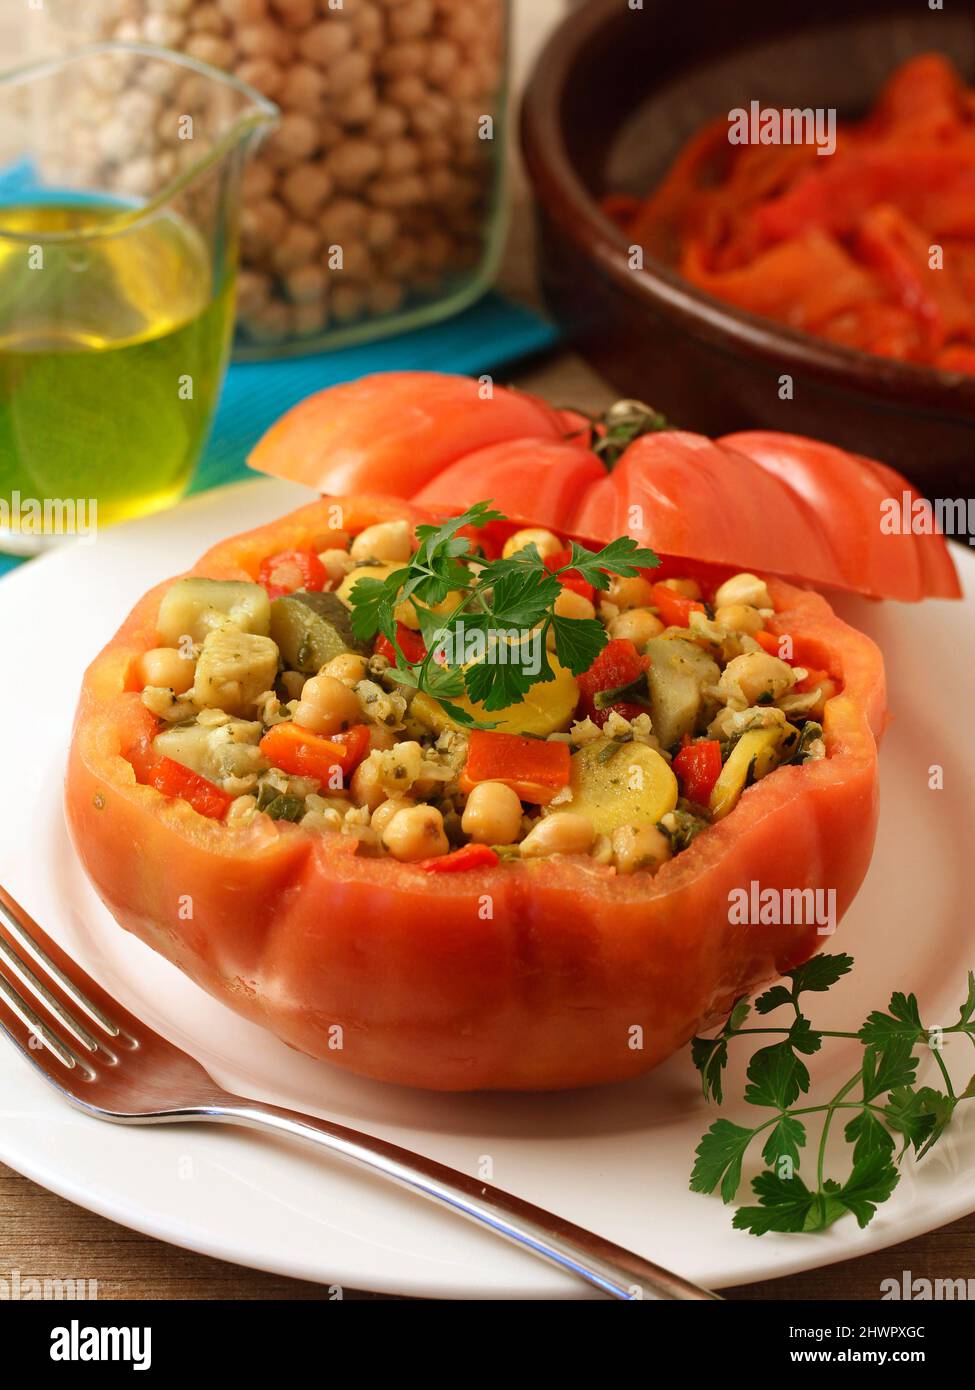 Stuffed tomato with vegetable mix with bulgur wheat, chickpeas and seasoning. Stock Photo